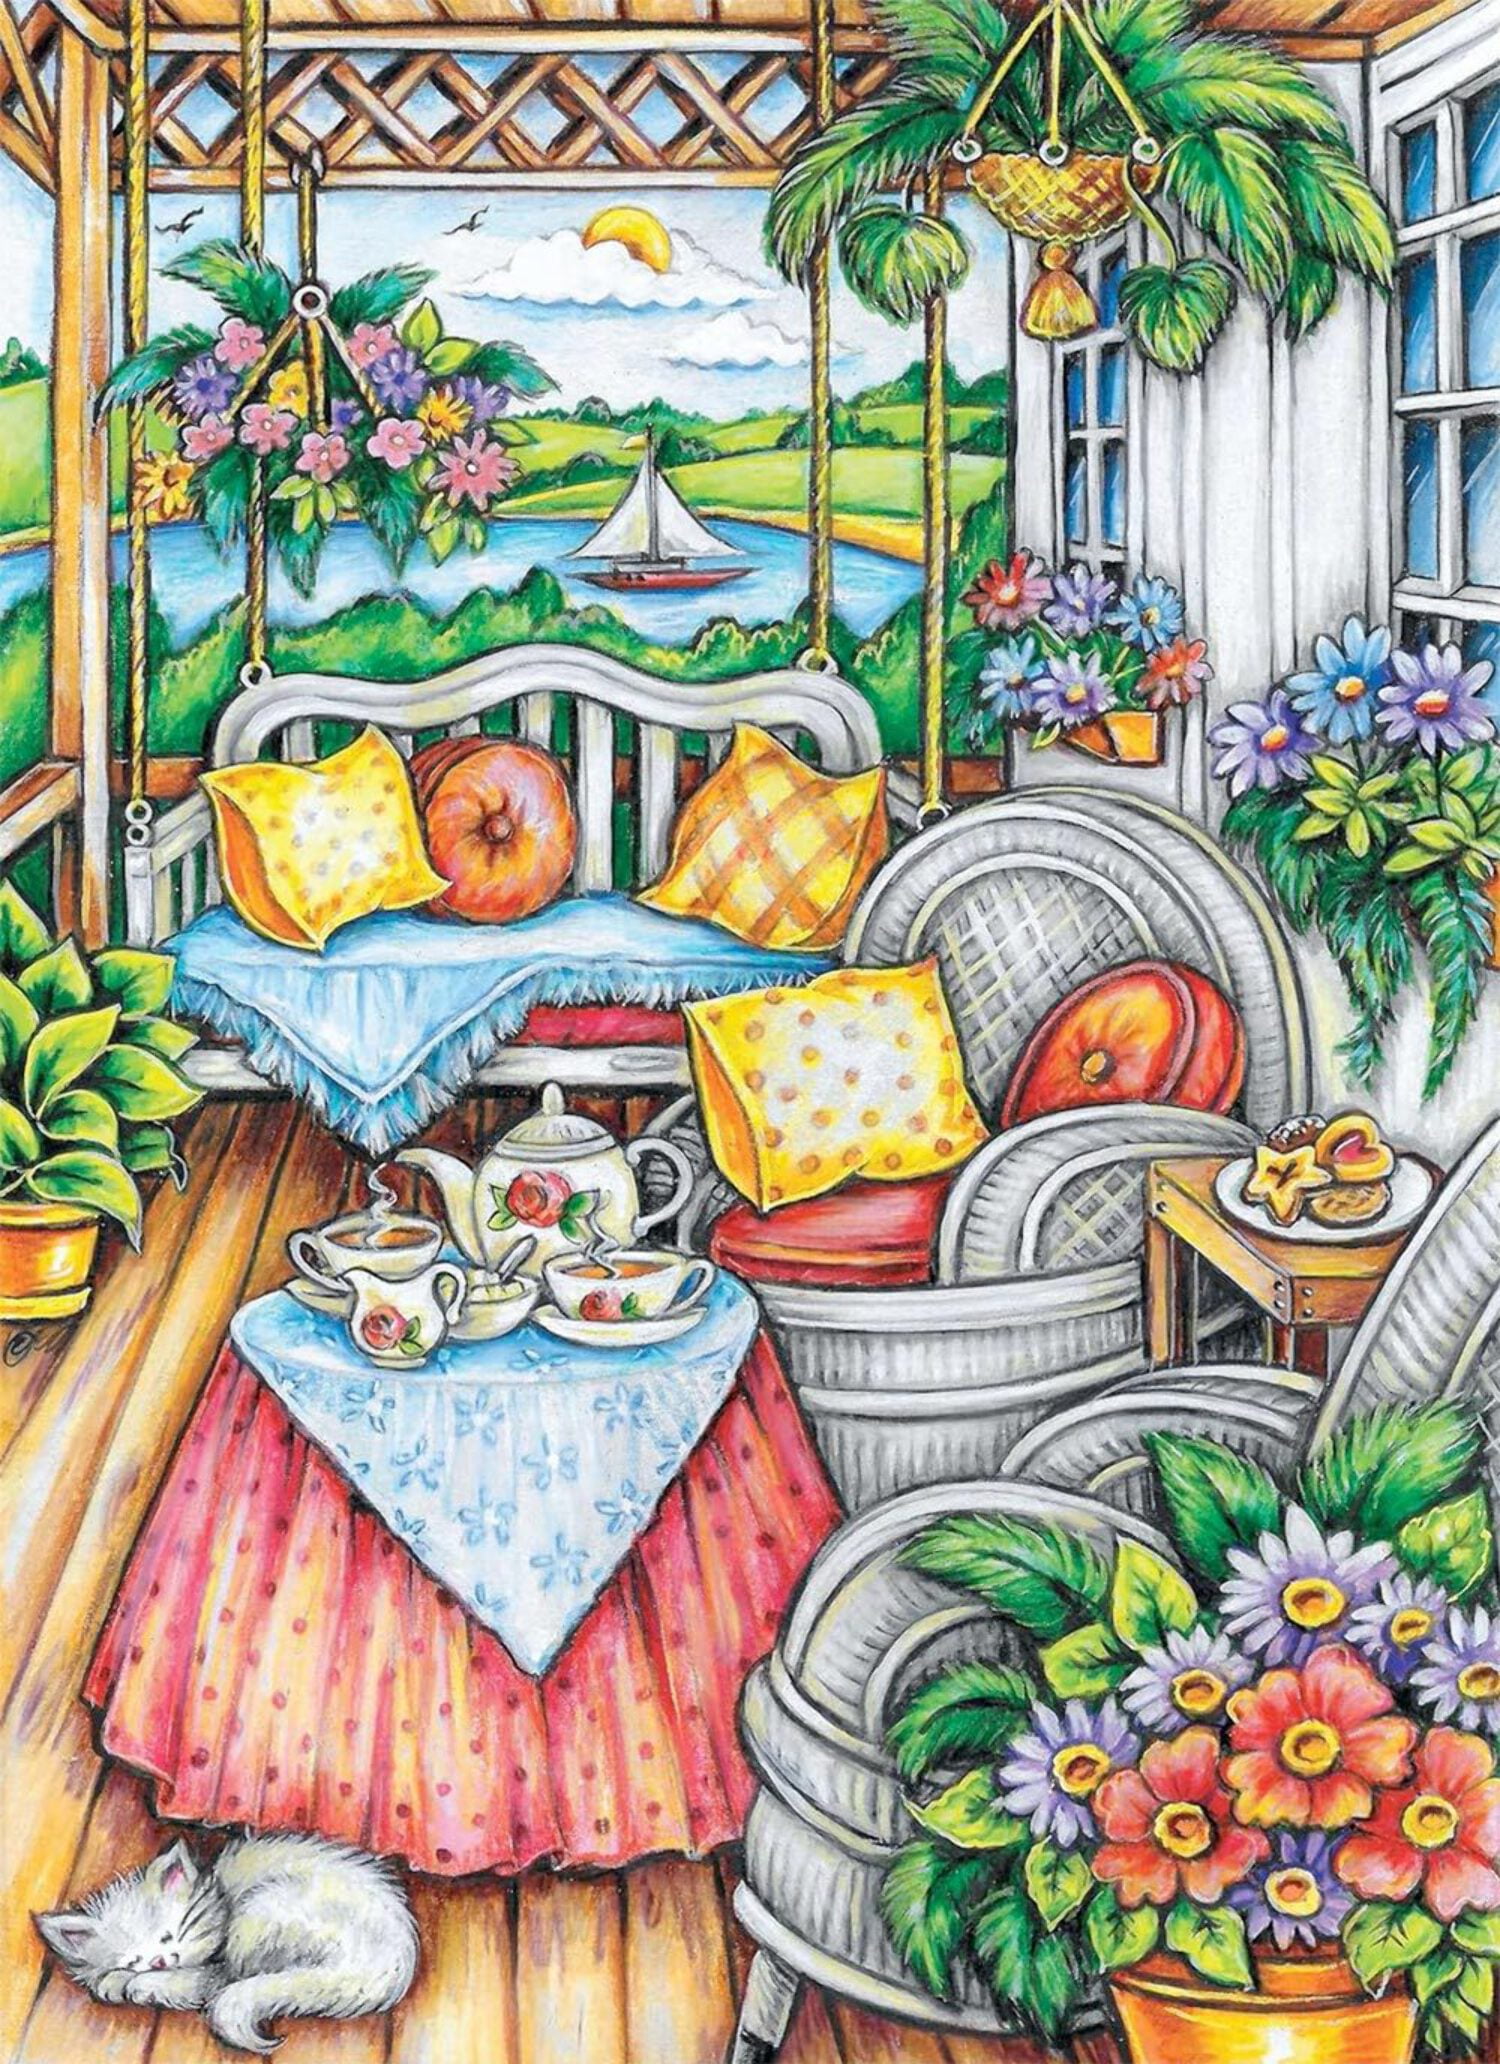 Towns, Tea Pots and More: Adult/Teen Coloring Book, Create Scenes, Fun